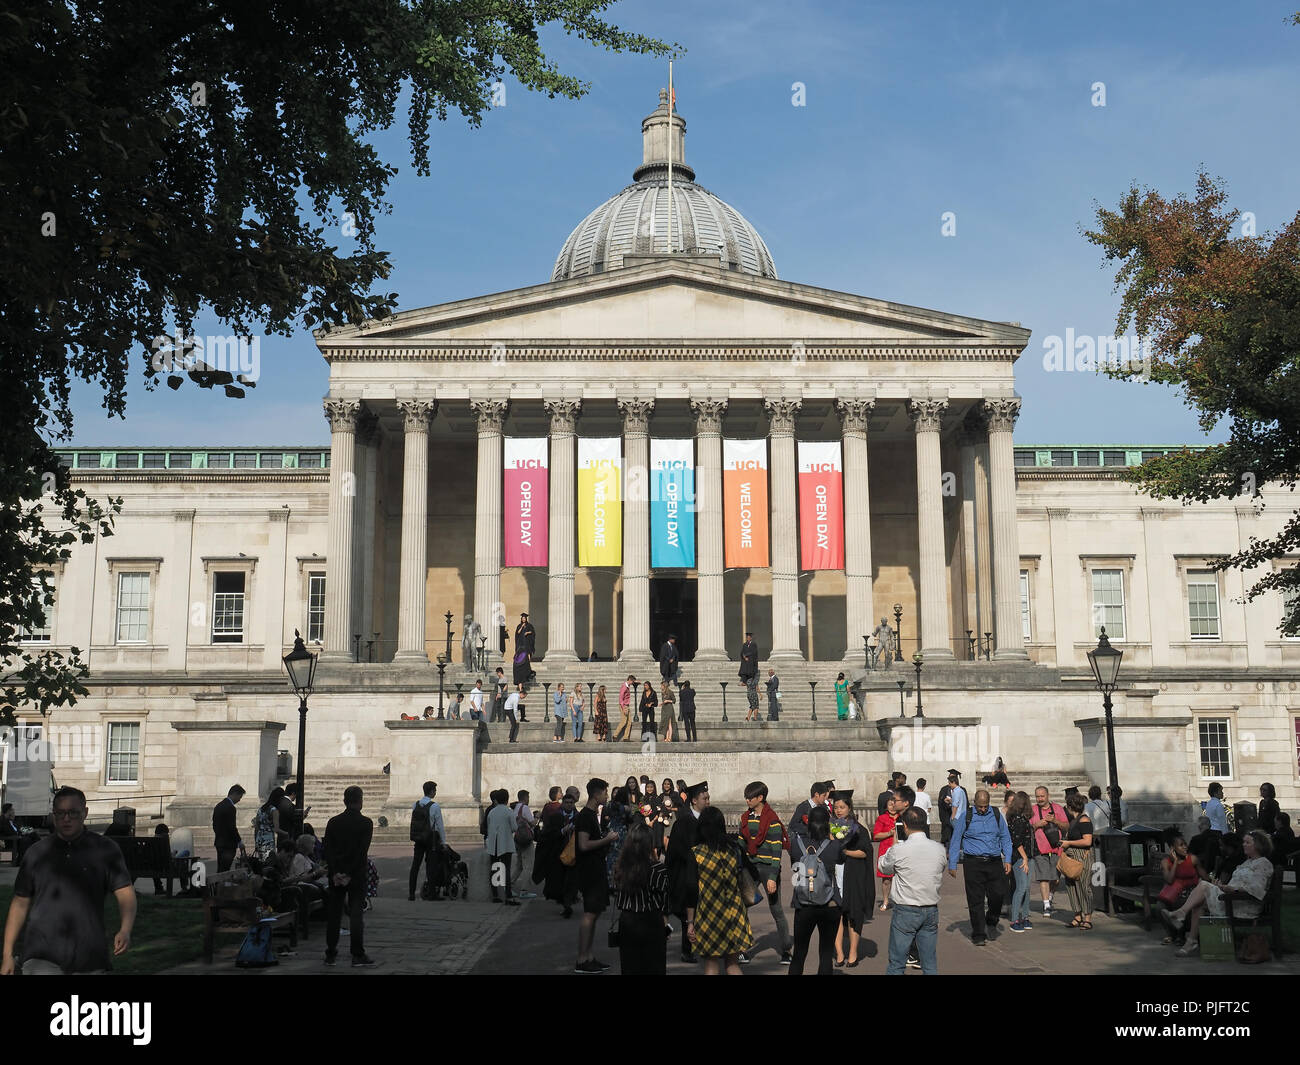 View of the UCL Main Building at University College London during an open day Stock Photo